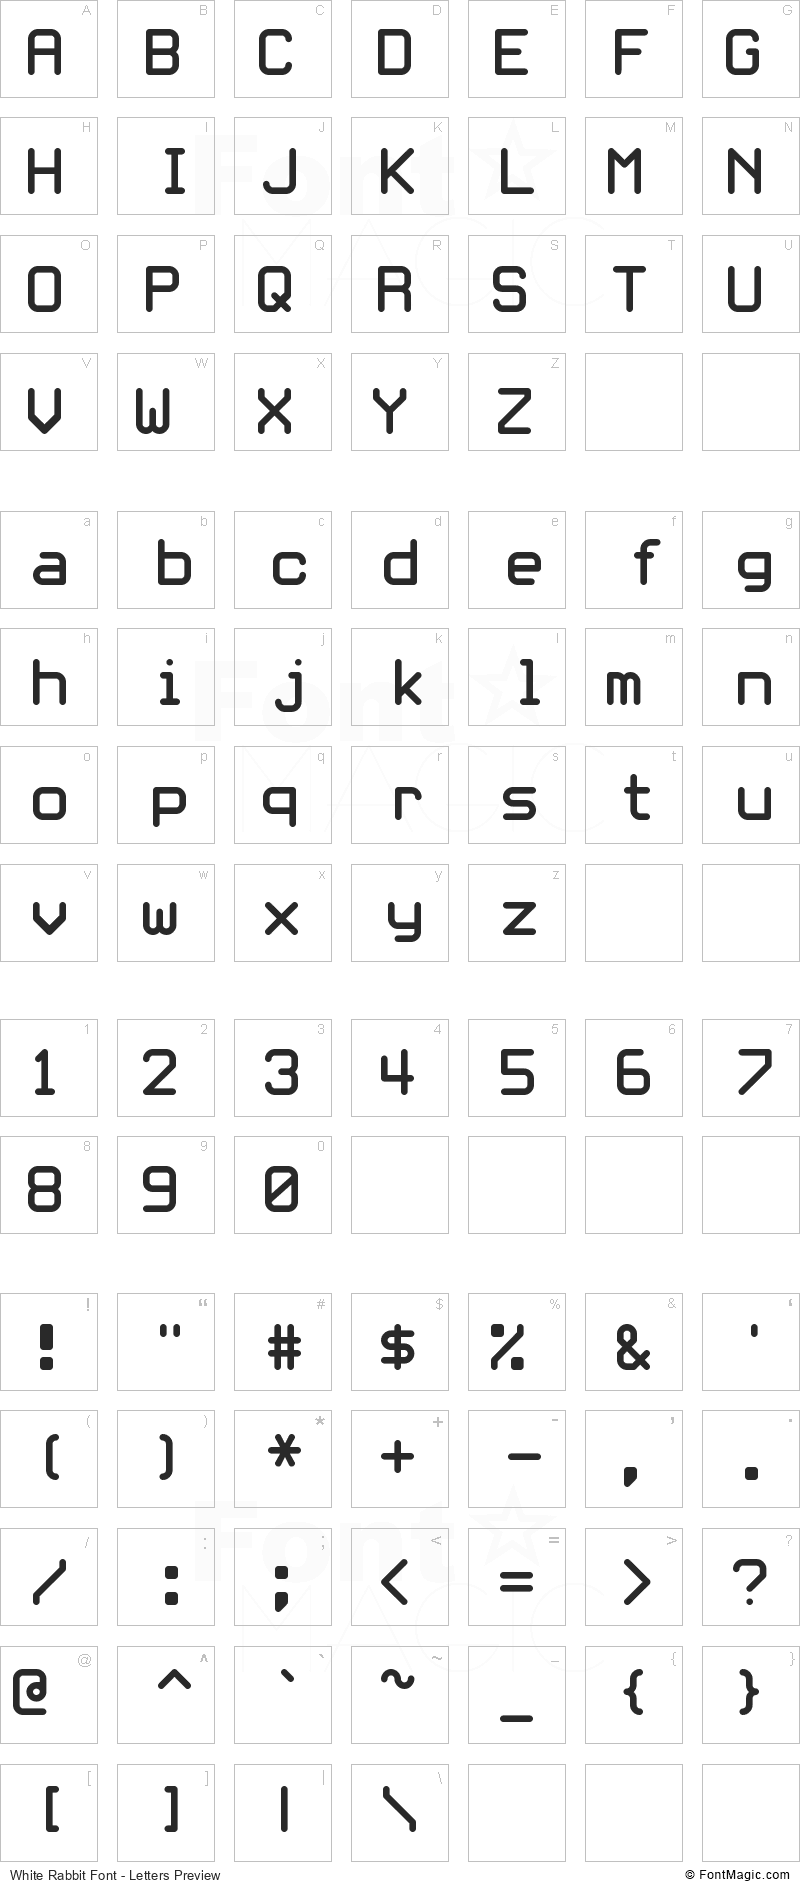 White Rabbit Font - All Latters Preview Chart